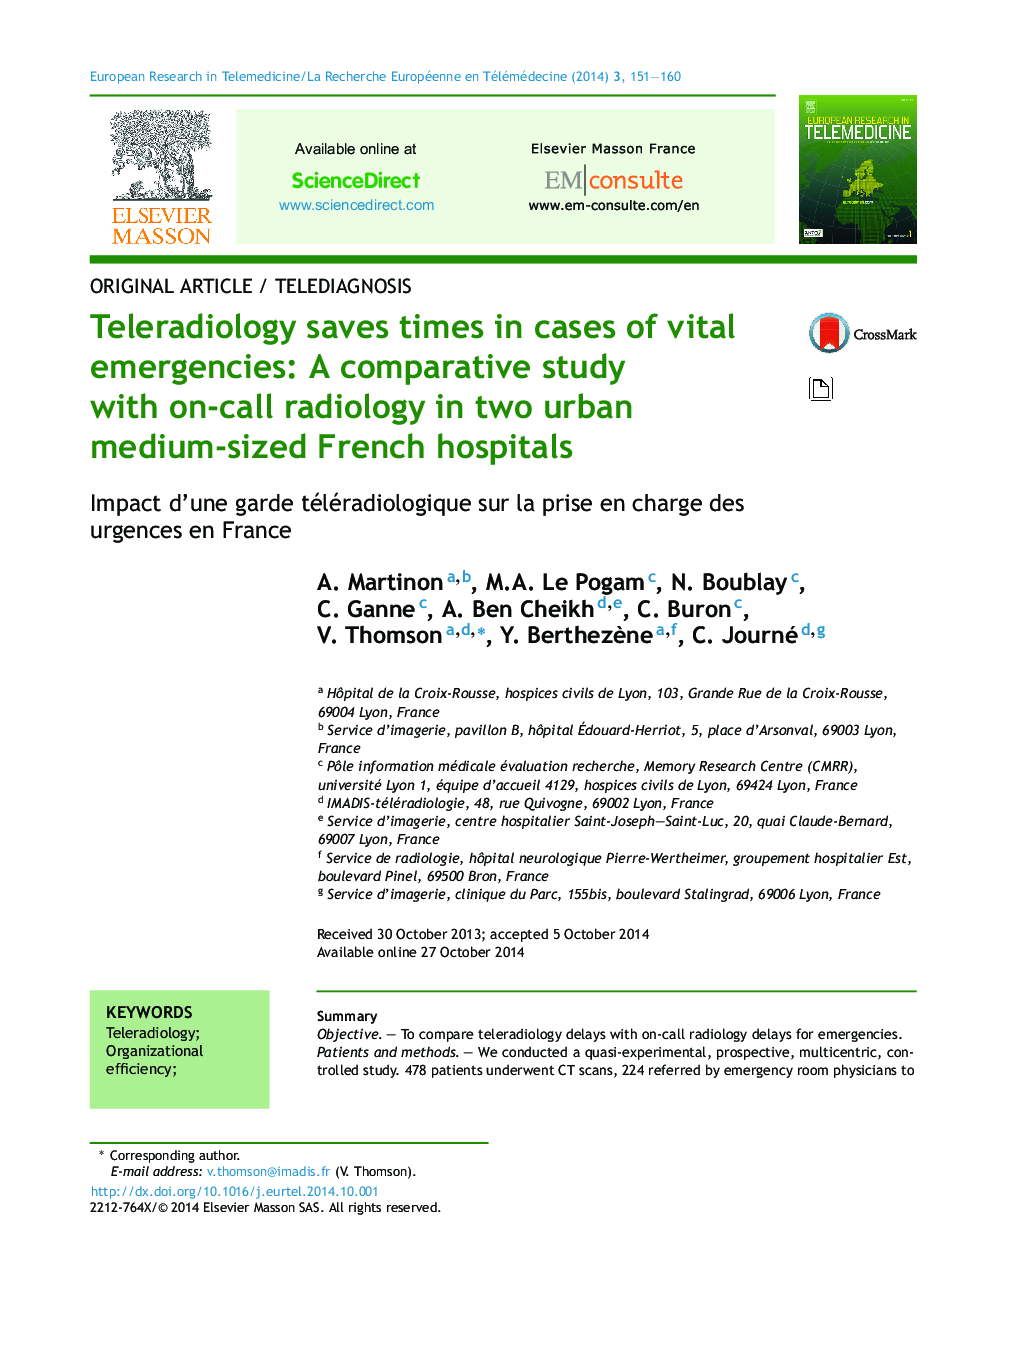 Teleradiology saves times in cases of vital emergencies: A comparative study with on-call radiology in two urban medium-sized French hospitals